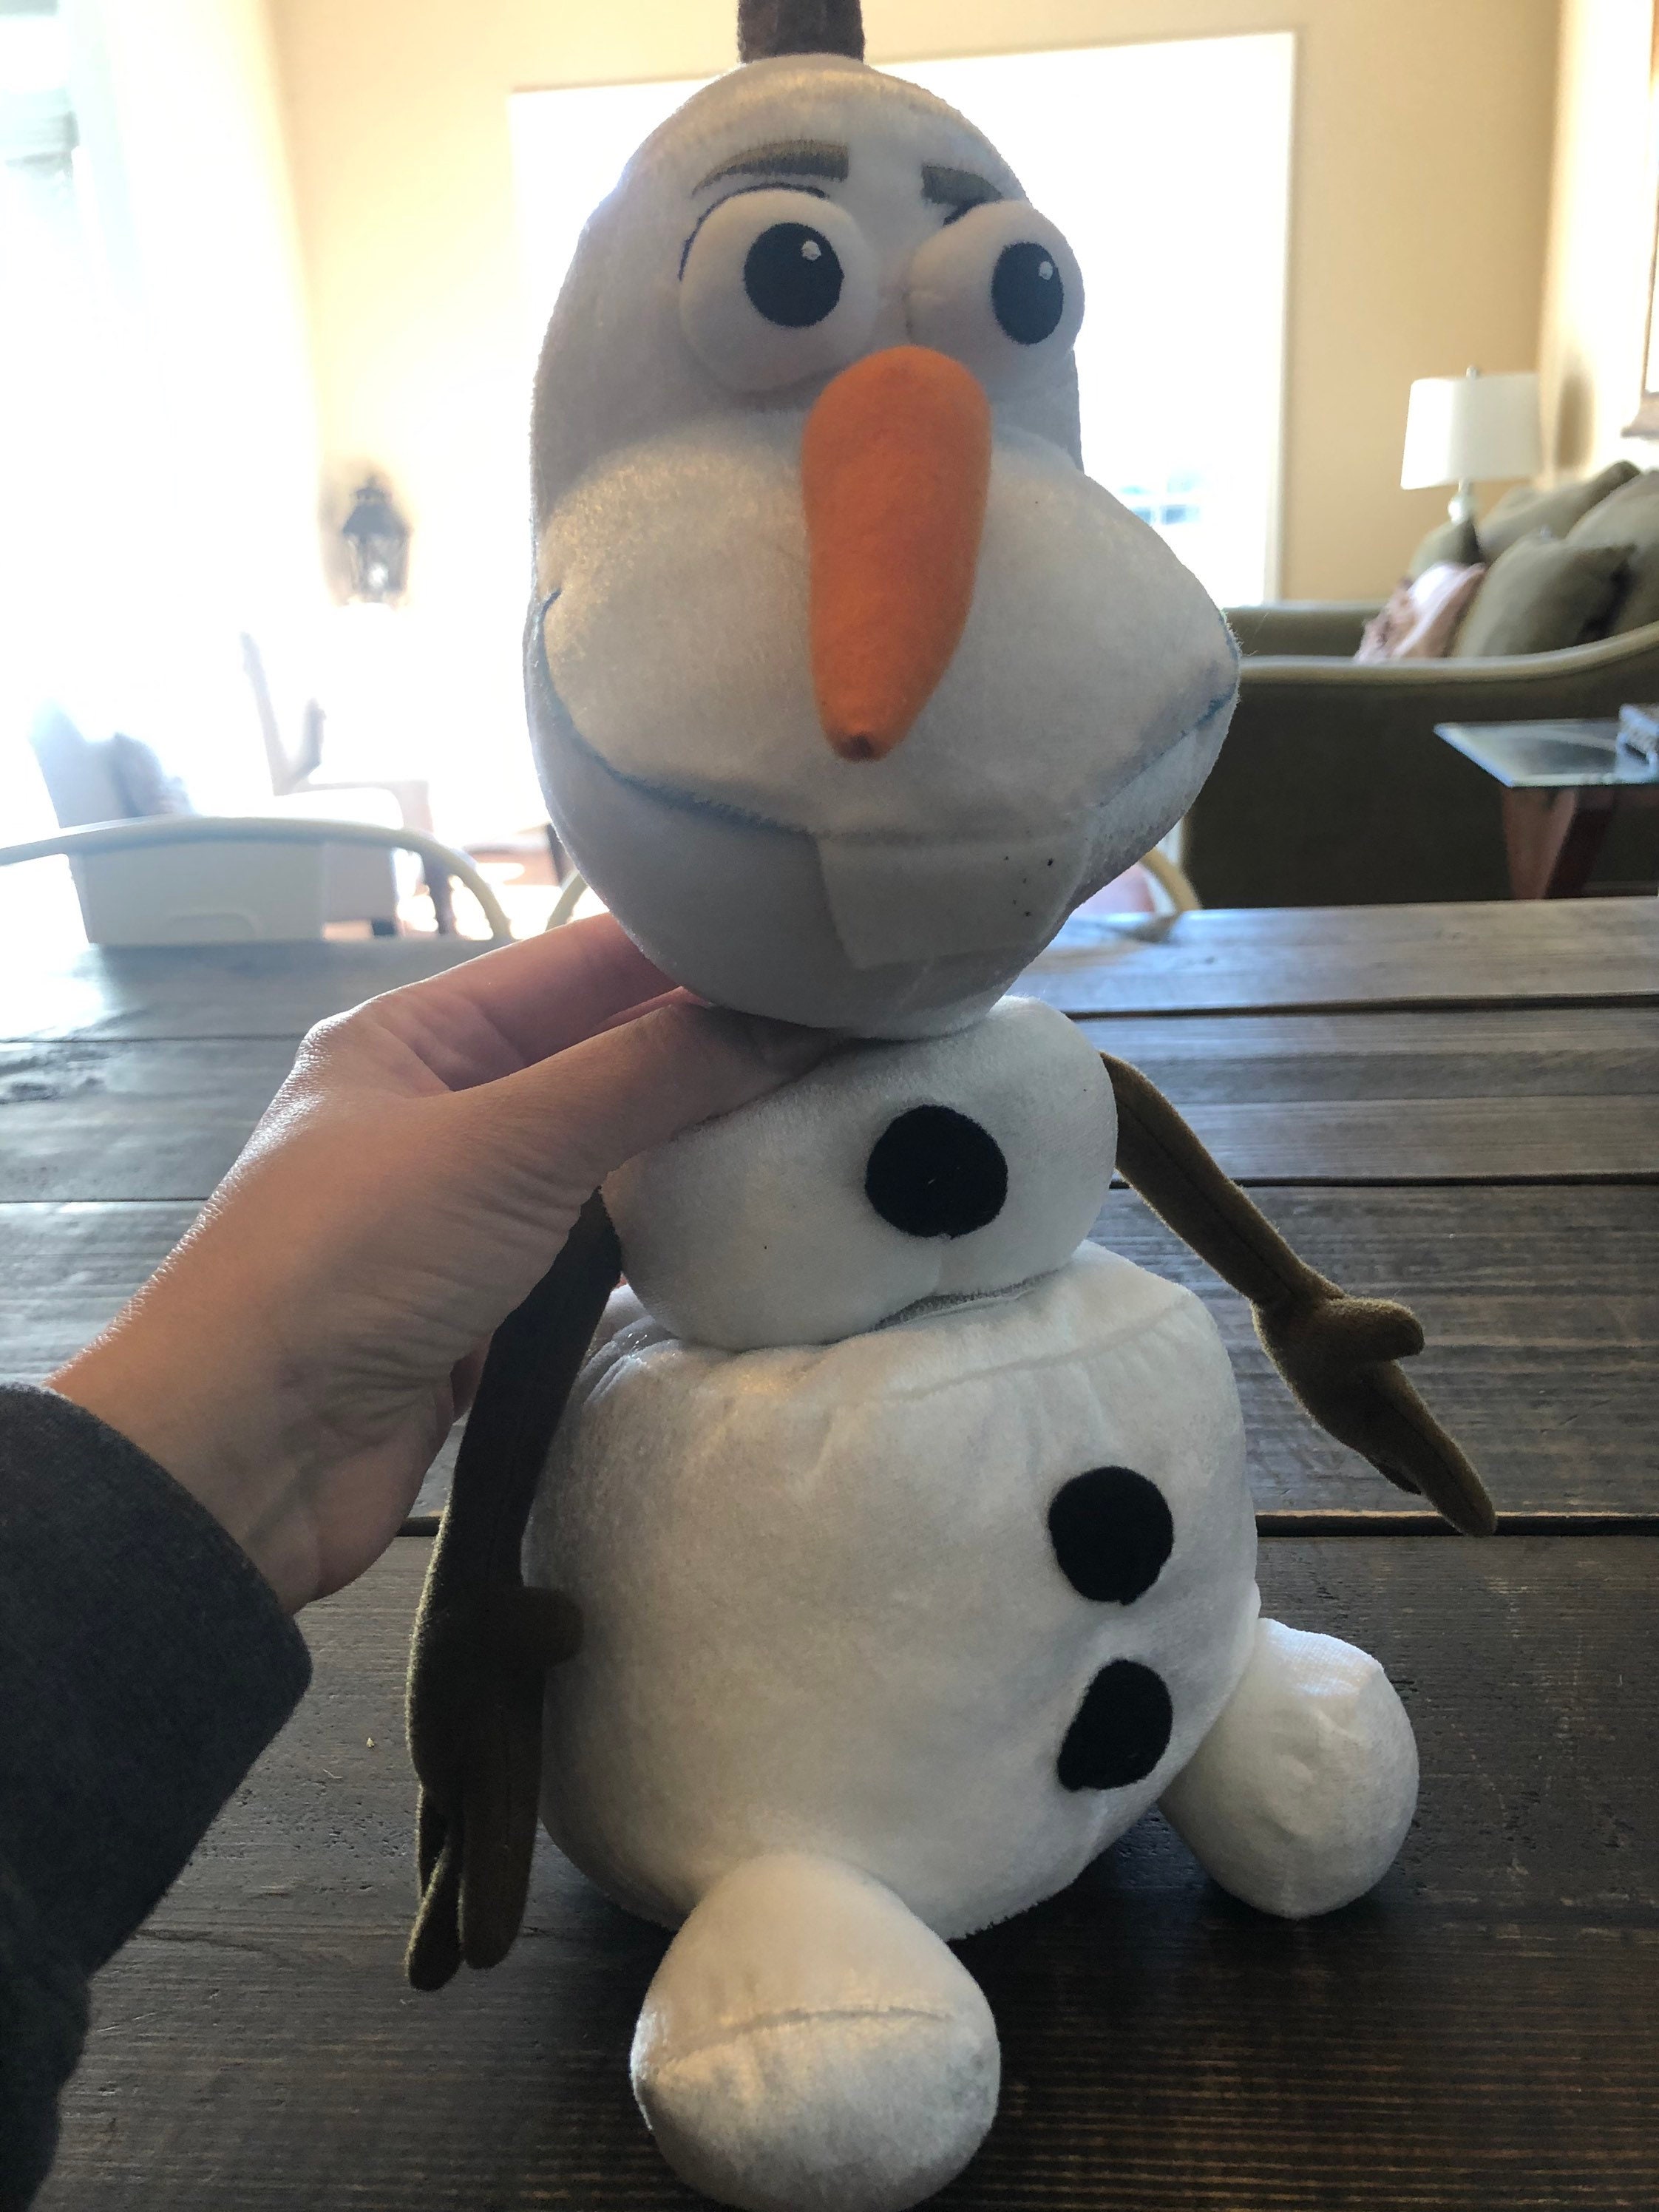 Disney Frozen Talking 9.5 Inch Small Plush Toy, Olaf, Stuffed Toy Snowman,  Officially Licensed Kids Toys for Ages 3 Up by Just Play